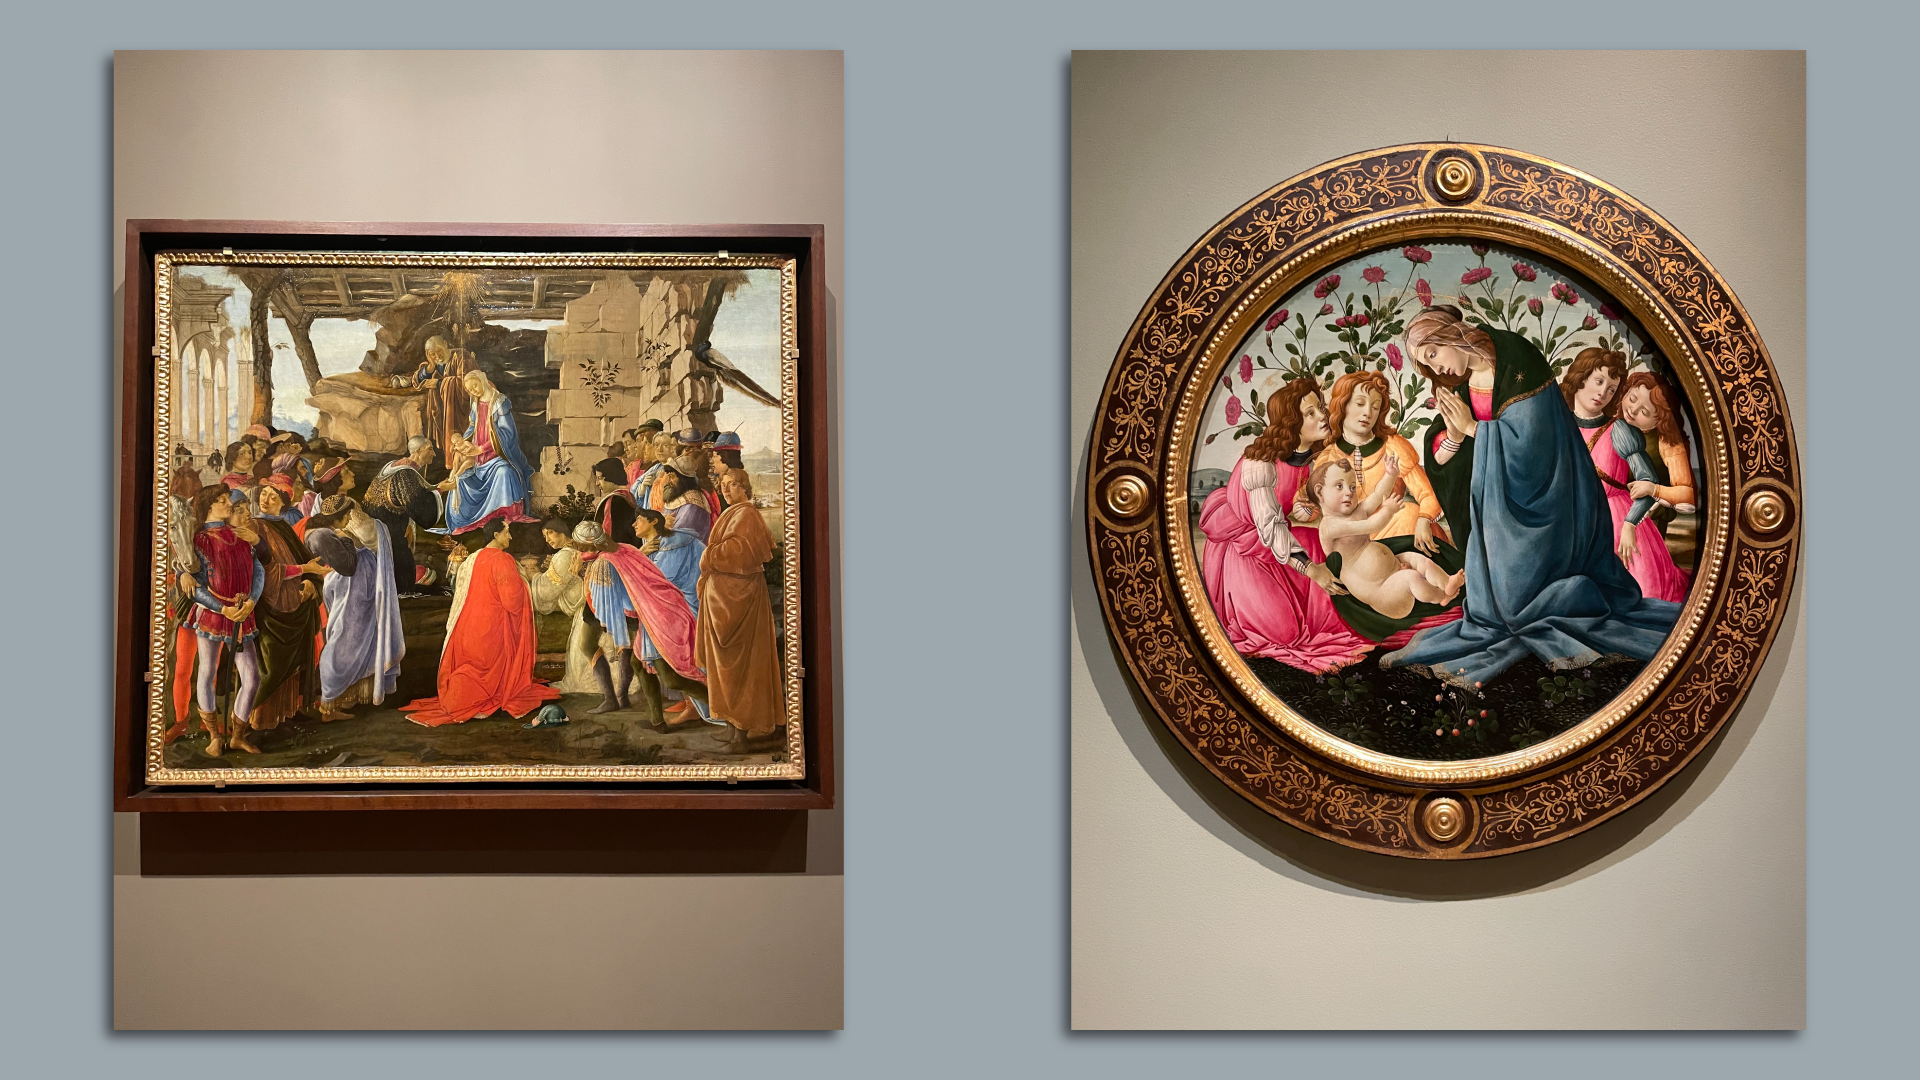 Two paintings by Sandro Botticelli, depicting a group of men gathered around the Magi and a woman surrounded by young children.